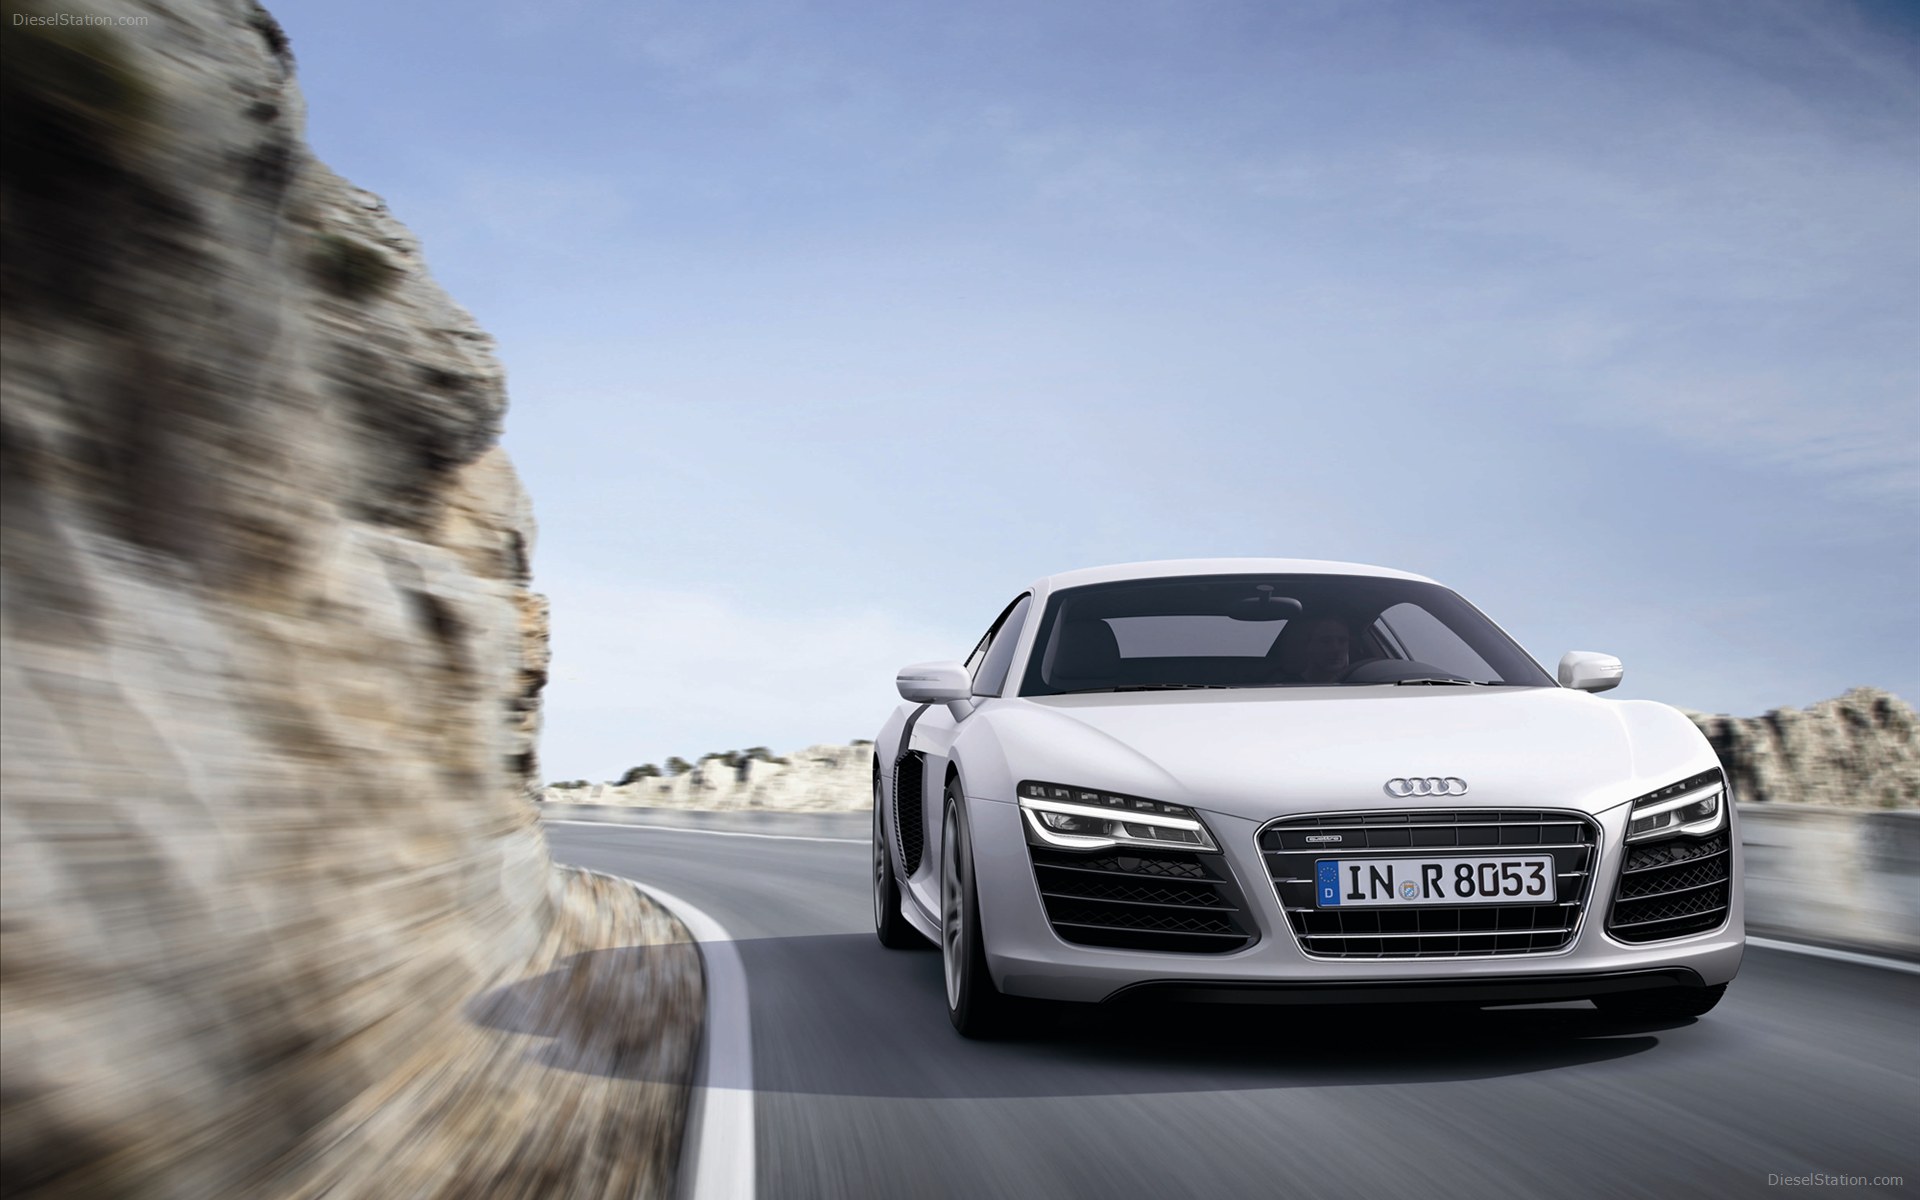 Awesome Audi R8 Wallpaper For Android | Audi Automotive Design